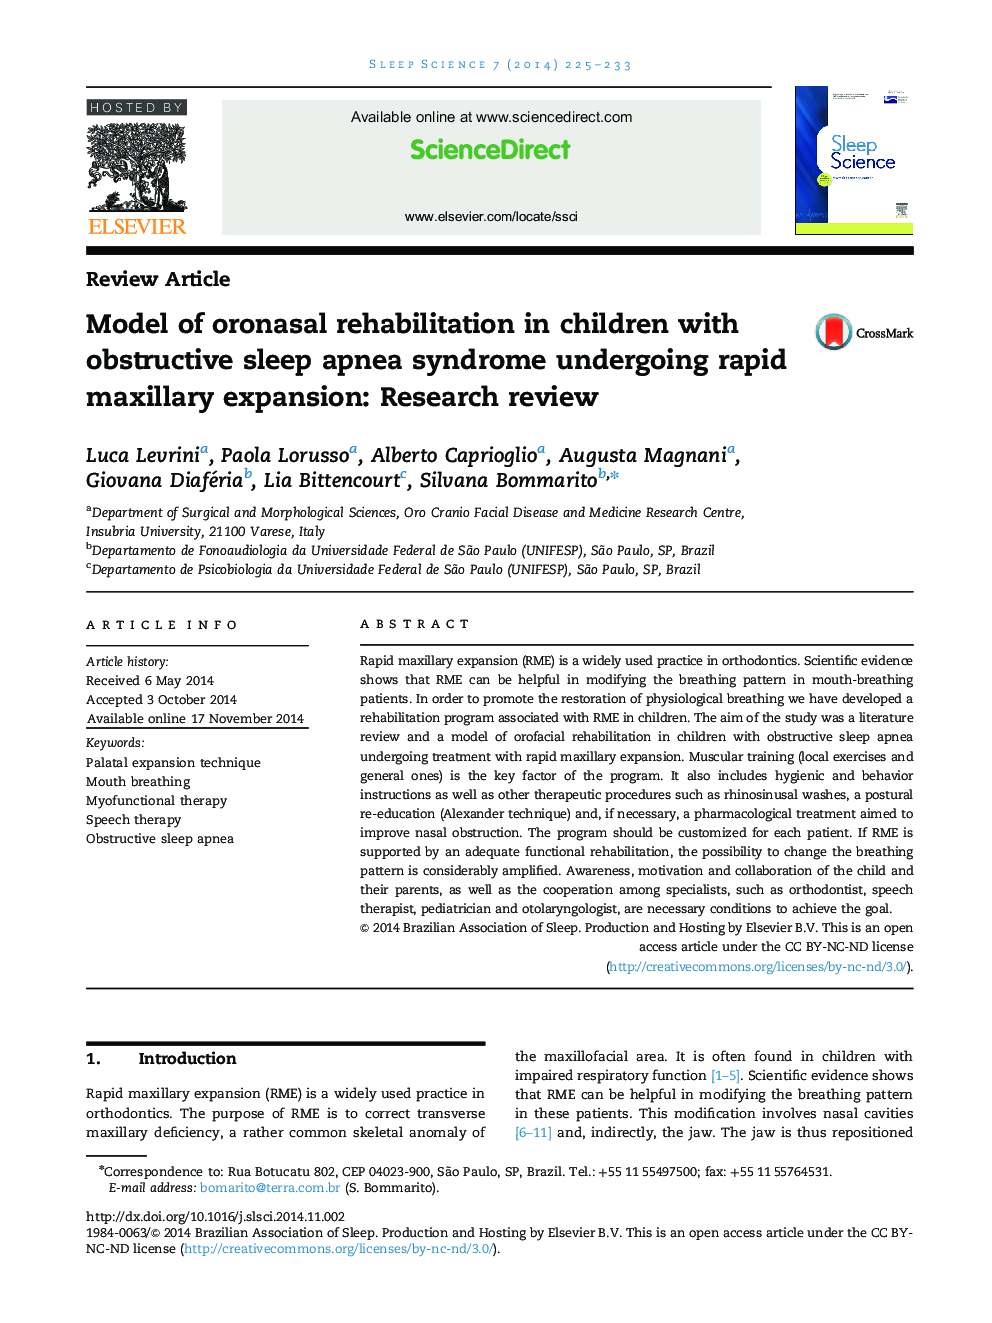 Model of oronasal rehabilitation in children with obstructive sleep apnea syndrome undergoing rapid maxillary expansion: Research review